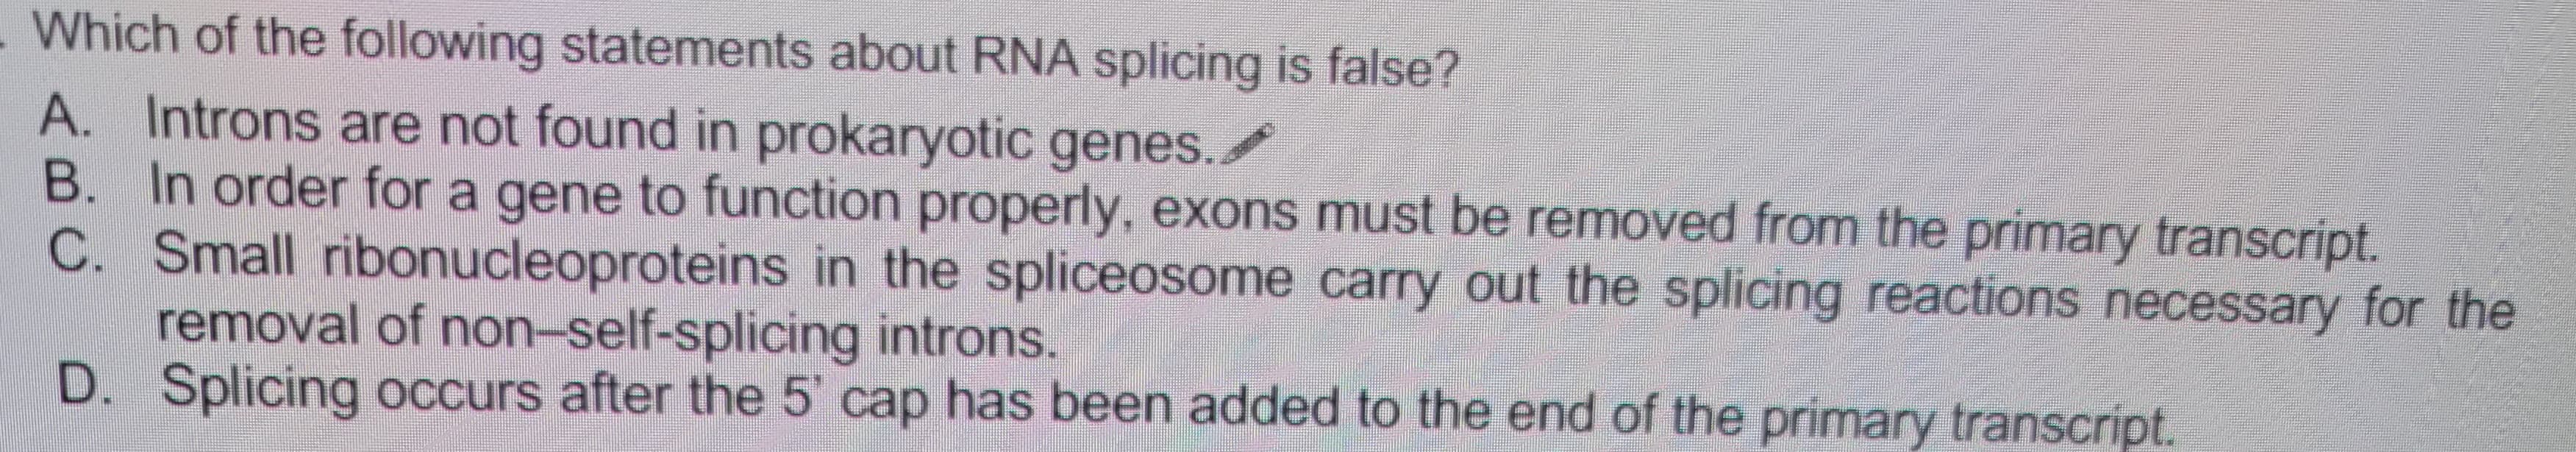 Which of the following statements about RNA splicing is false?
A. Introns are not found in prokaryotic genes./
B. In order for a gene to function properly, exons must be removed from the primary transcript.
C. Small ribonucleoproteins in the spliceosome carry out the splicing reactions necessary for the
removal of non-self-splicing introns.
D.
Splicing occurs after the 5' cap has been added to the end of the primary transcript.